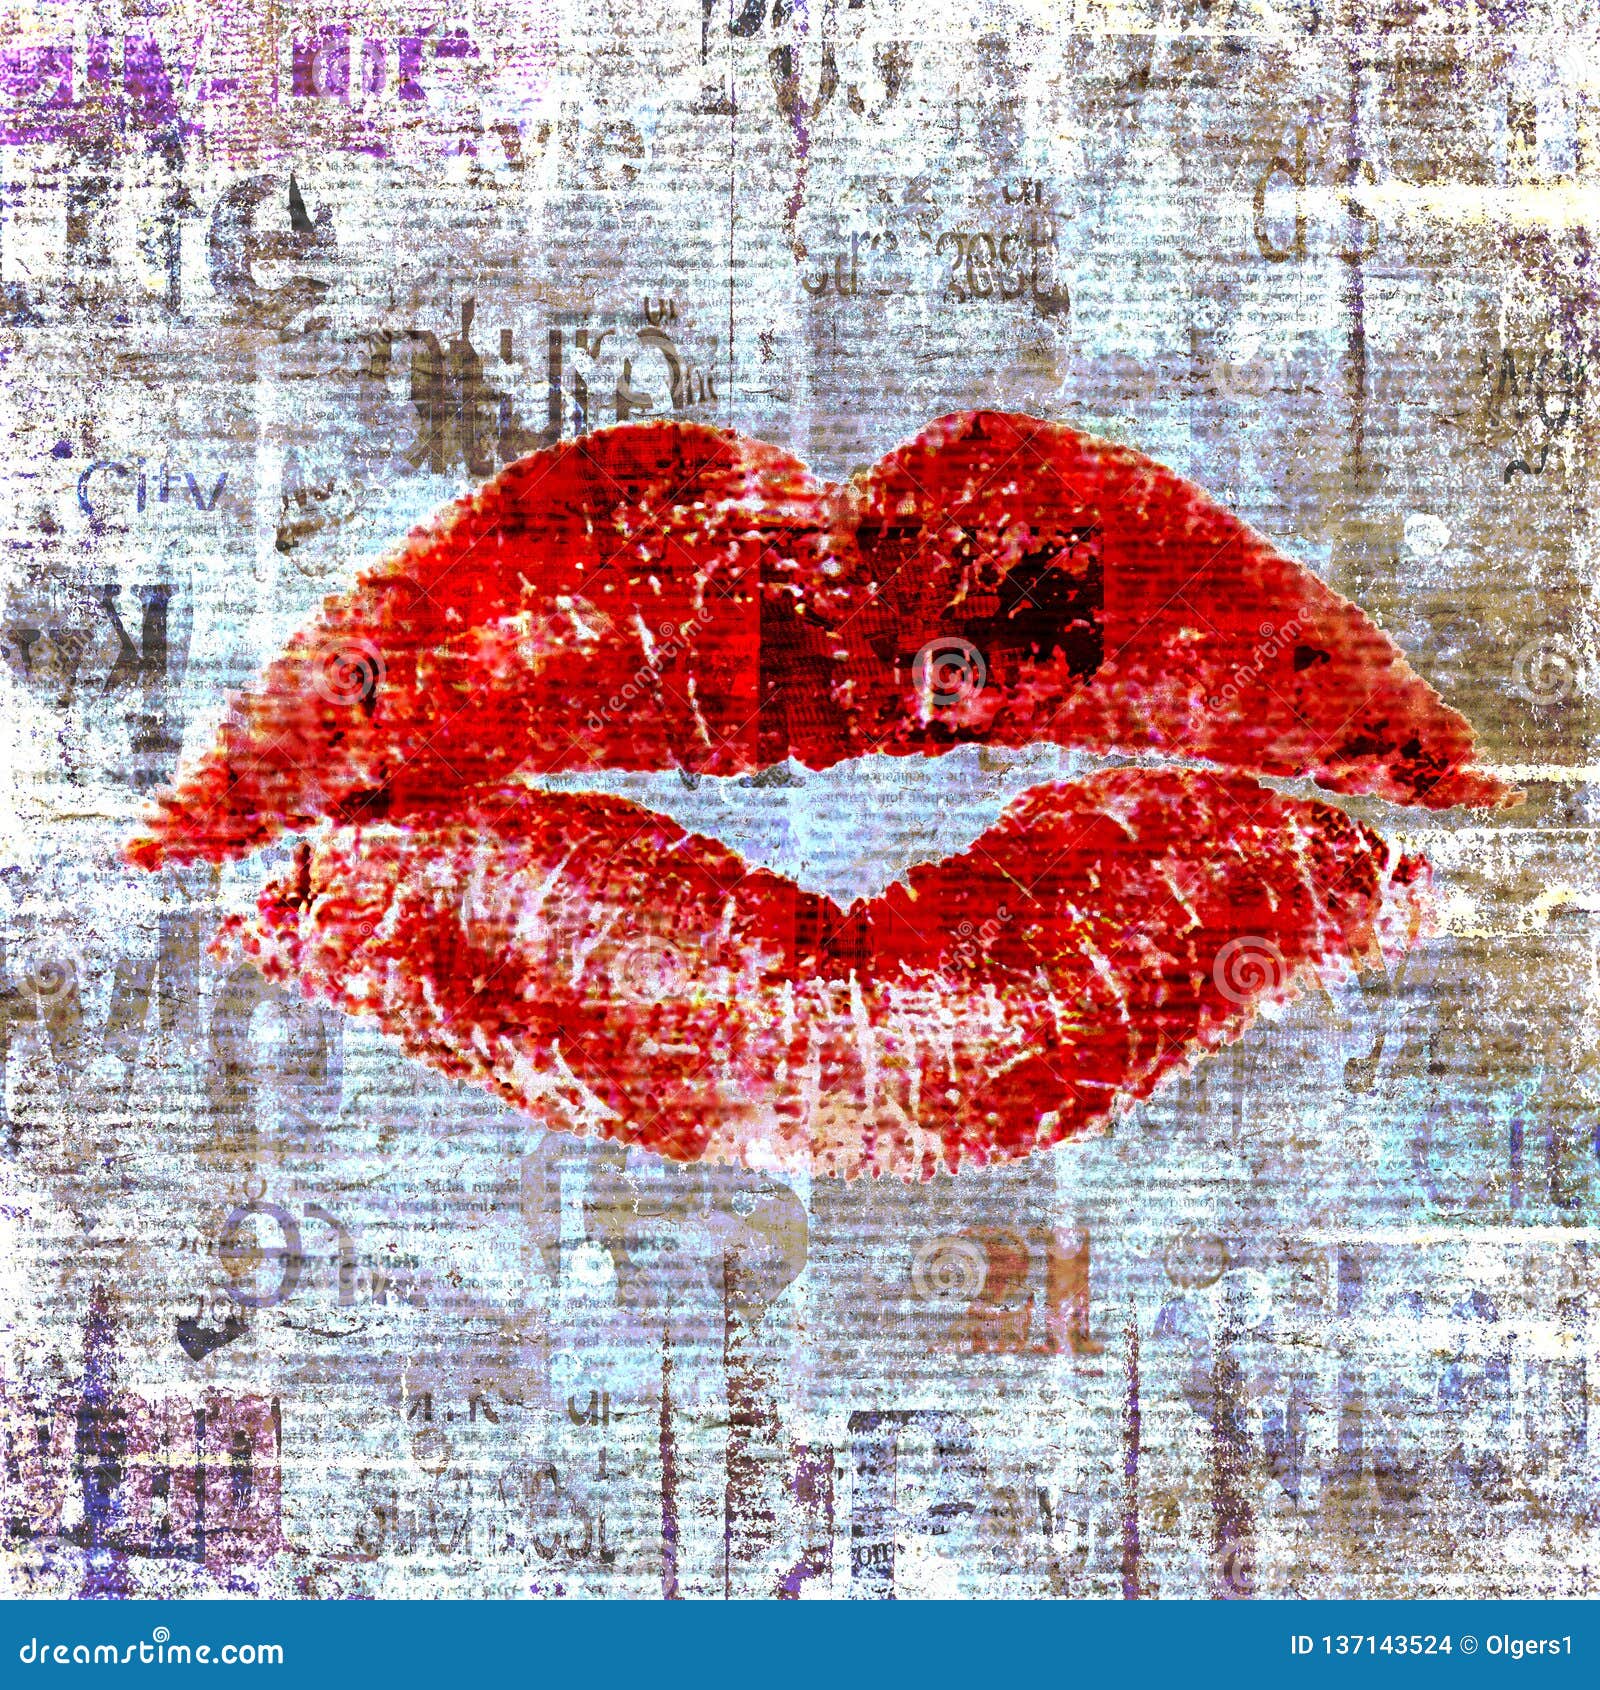 newspaper with old grunge vintage unreadable paper texture background and woman`s lipstick kiss